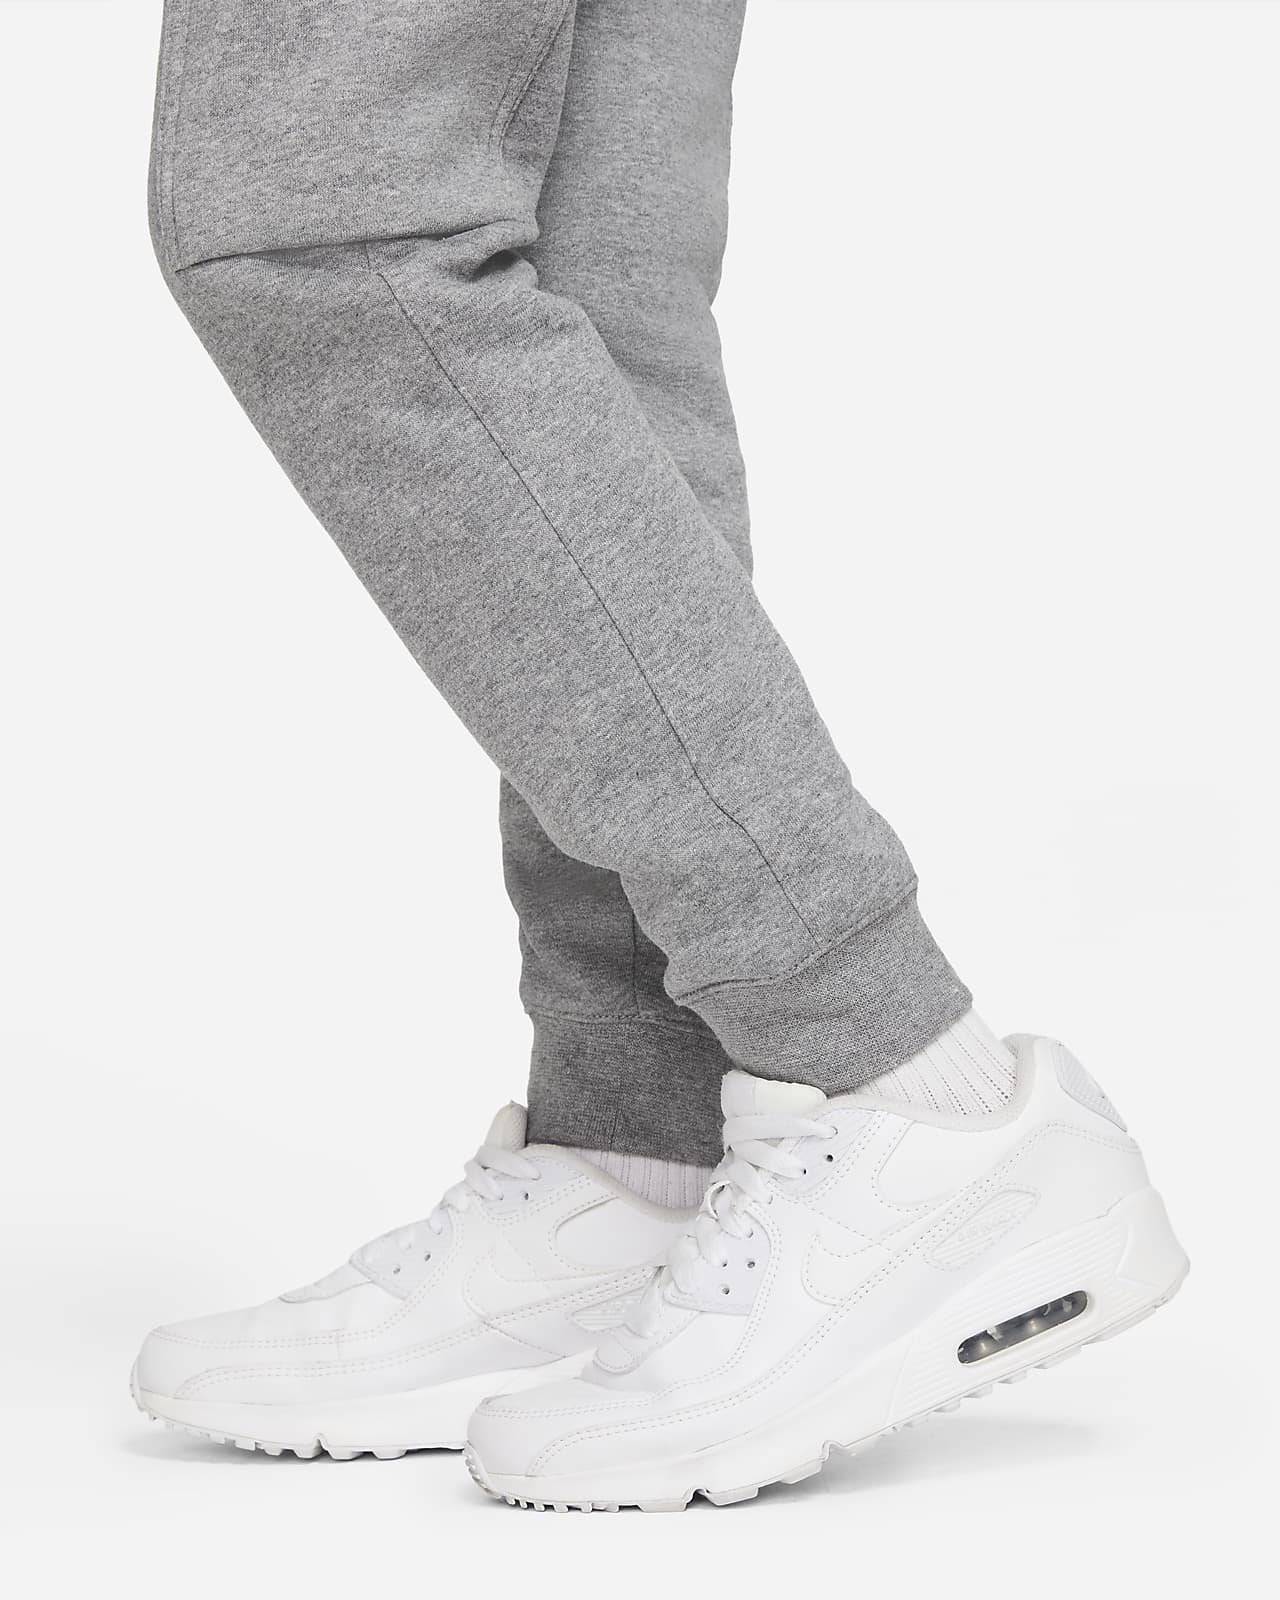 nike pants with cargo pockets